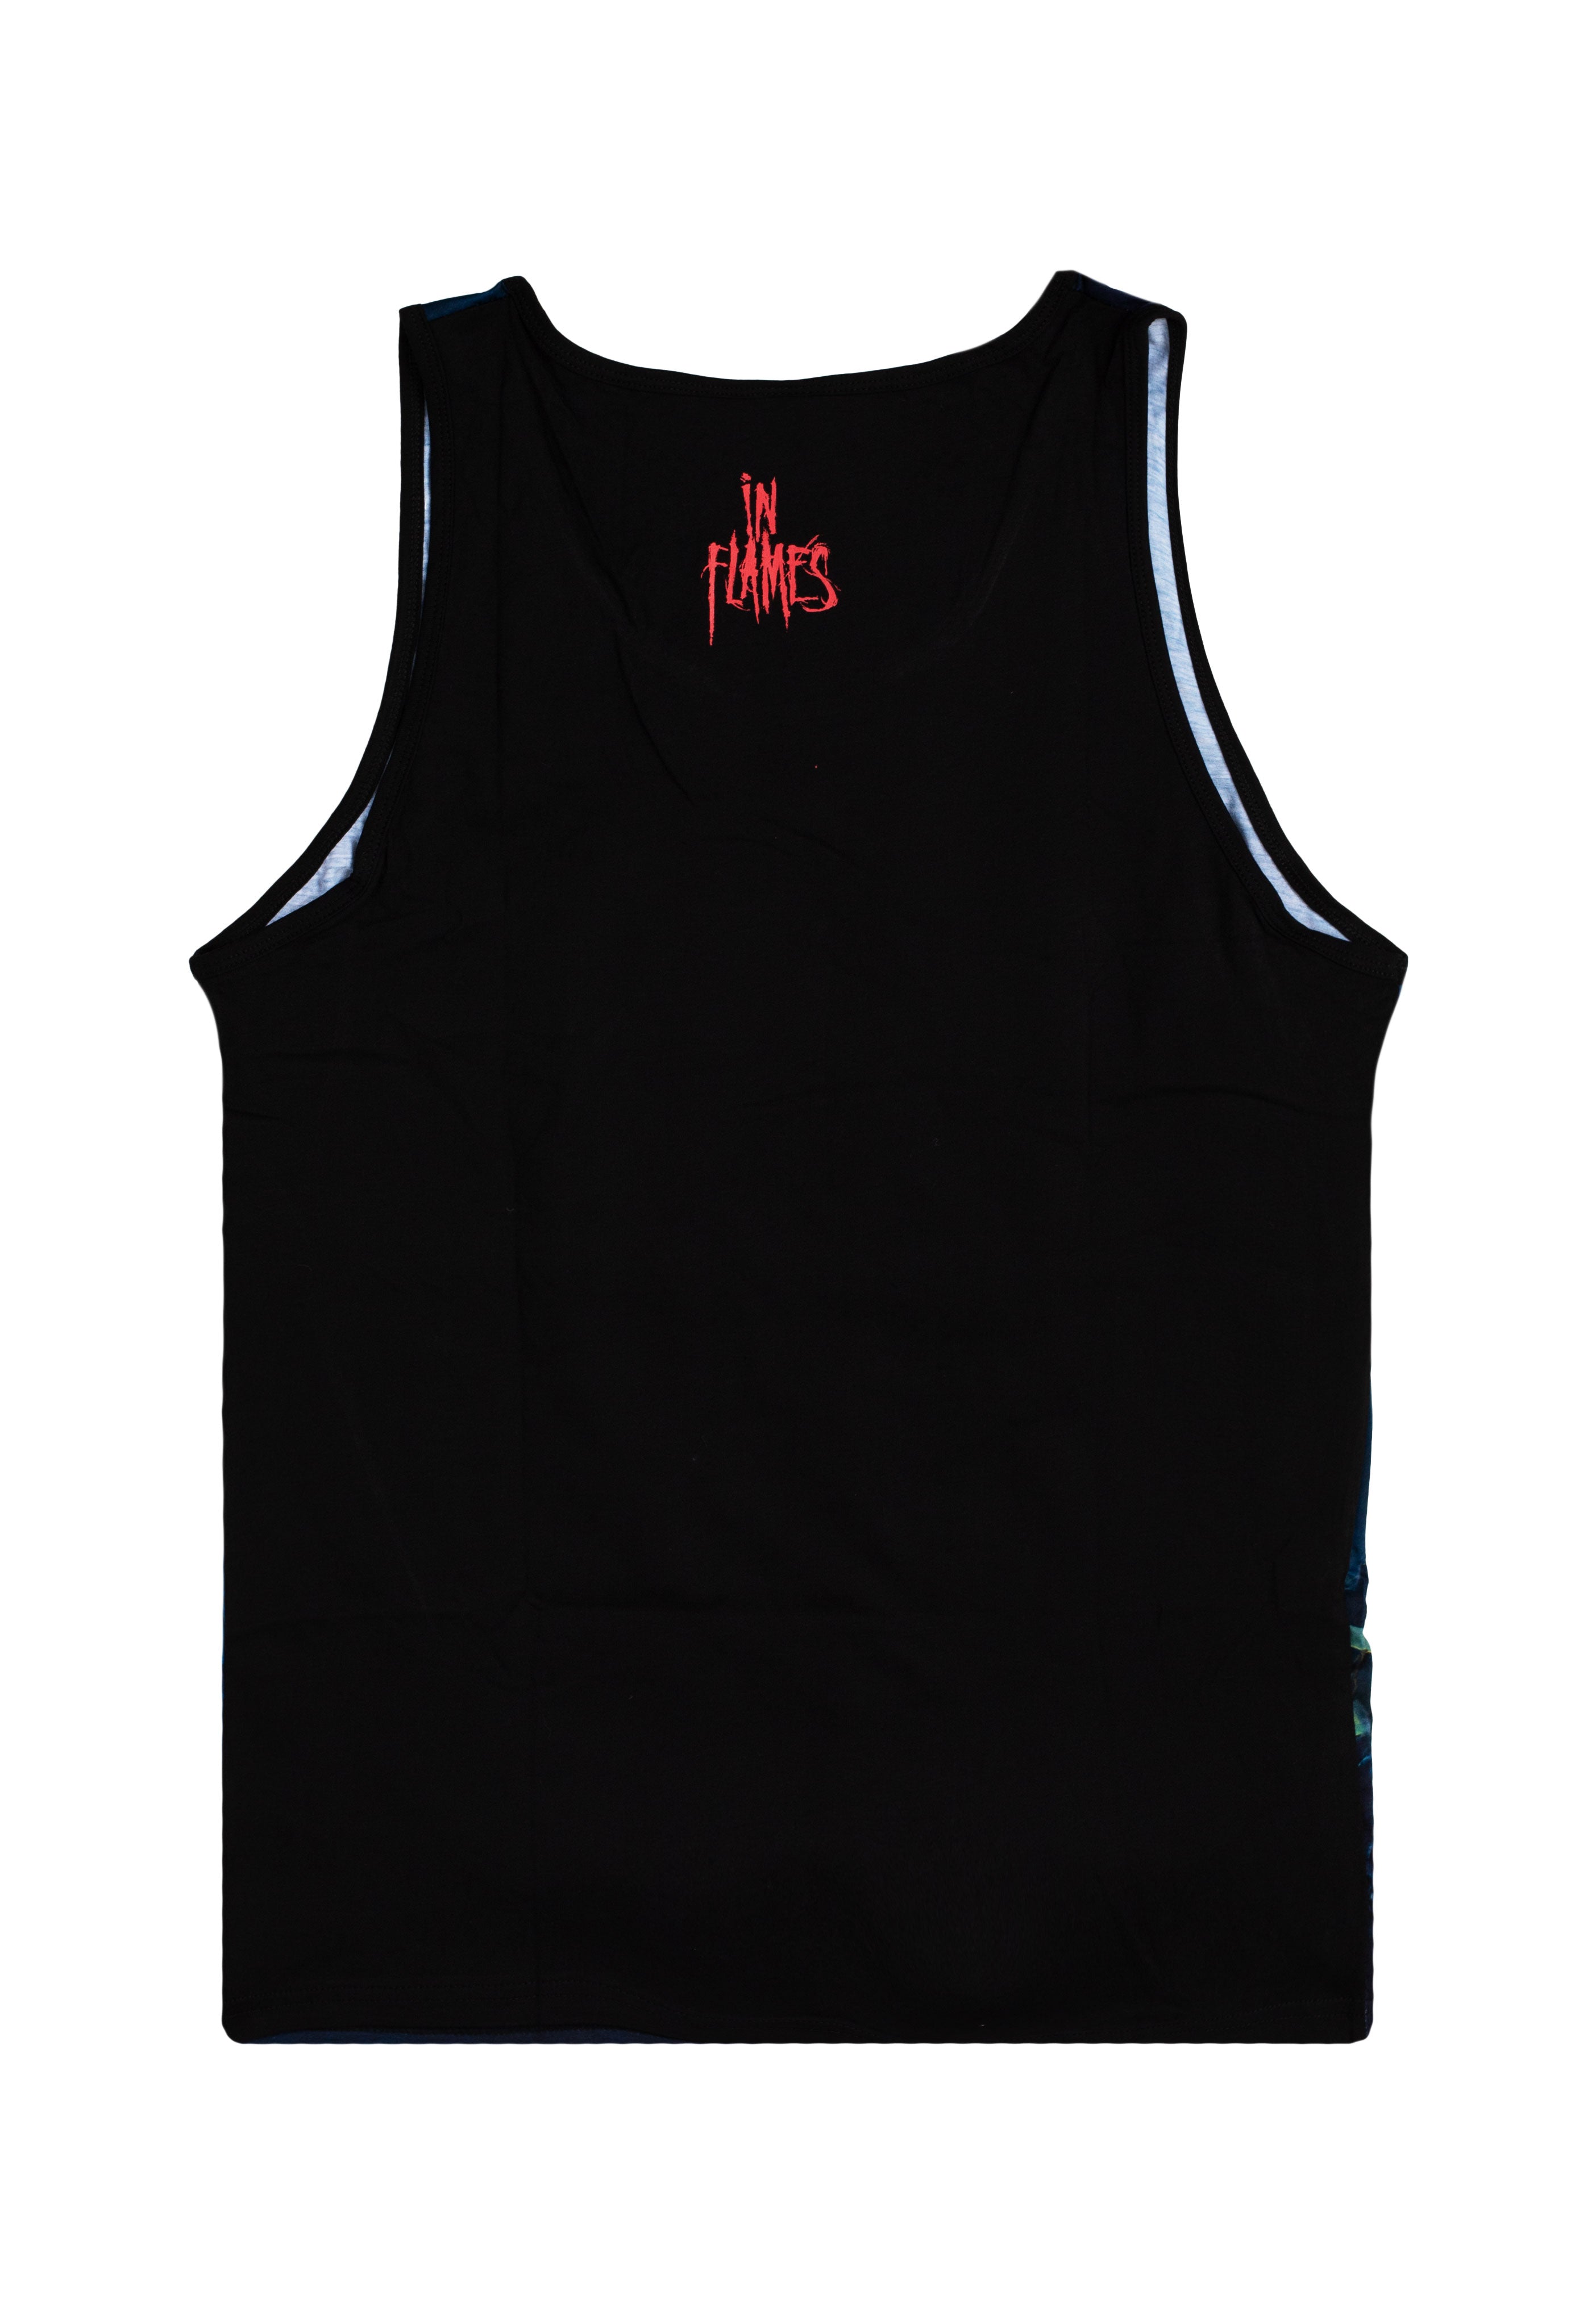 In Flames - Forgone Allover - Tank